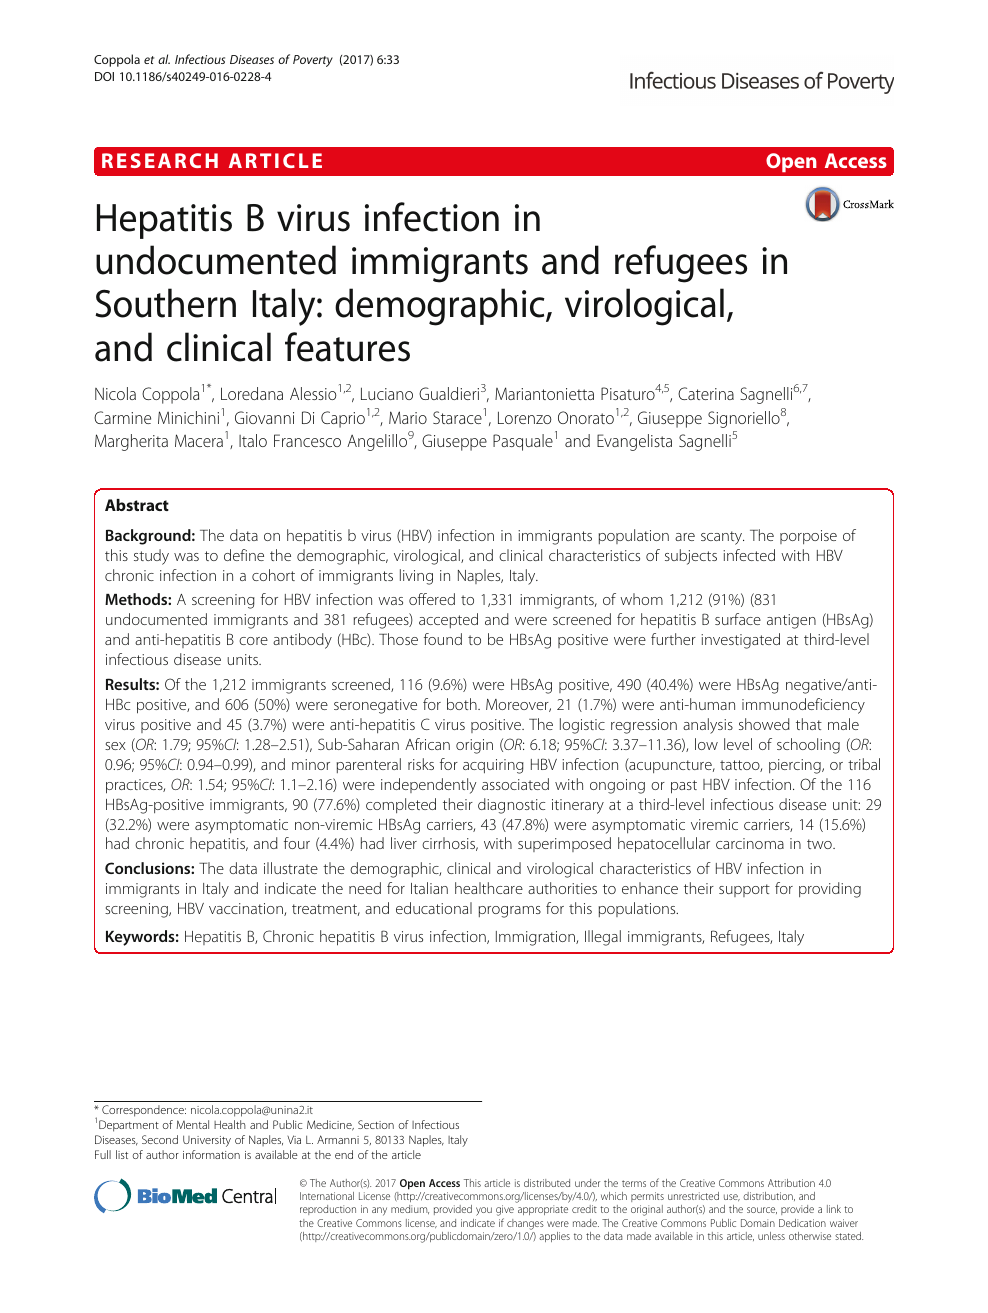 Hepatitis B Virus Infection In Undocumented Immigrants And Refugees In Southern Italy Demographic Virological And Clinical Features Topic Of Research Paper In Health Sciences Download Scholarly Article Pdf And Read For